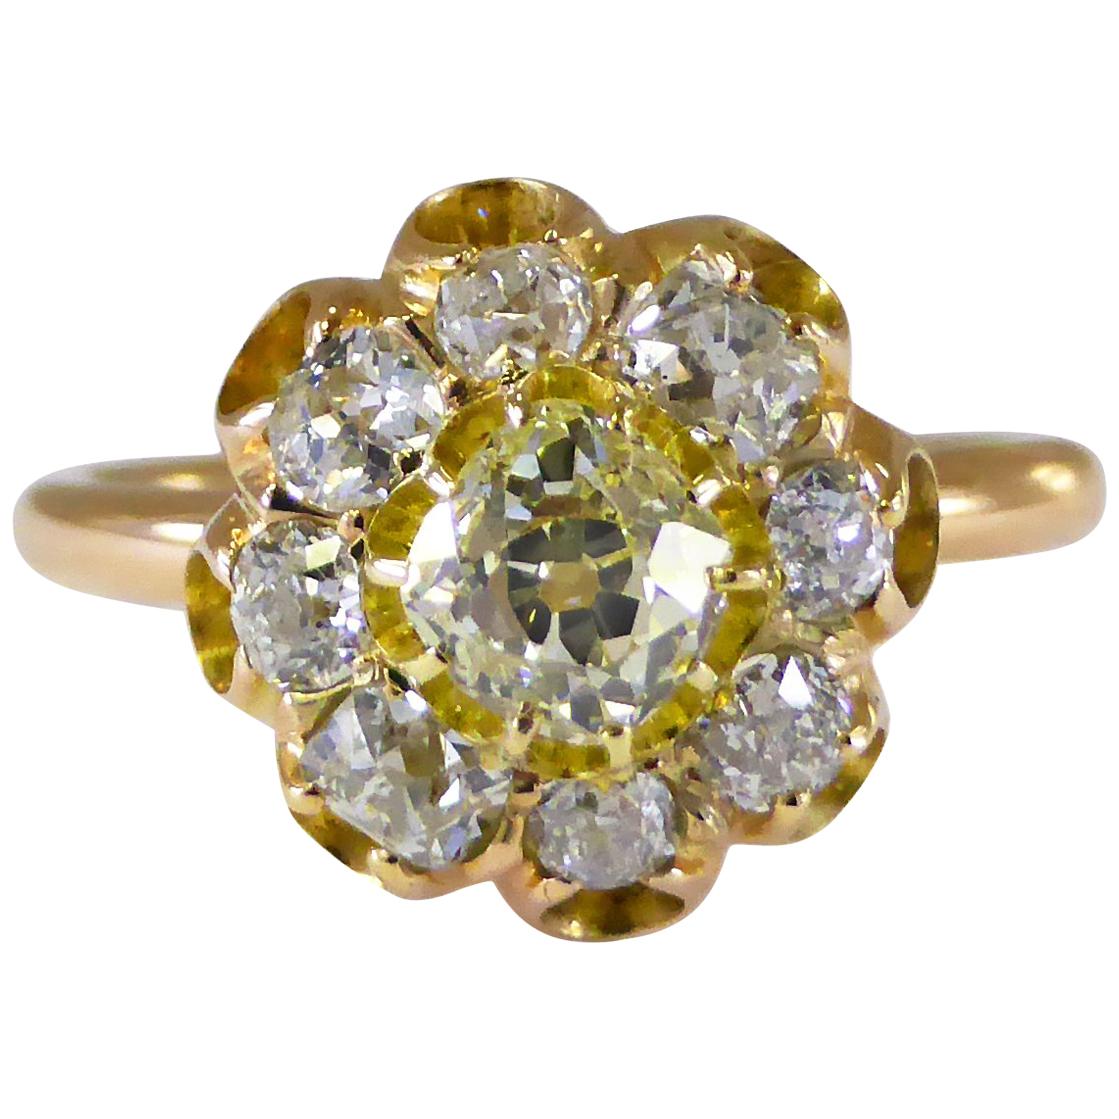 Yellow Diamond P, Q, R Color G-I Color Old-Mine Cut Daisy Ring